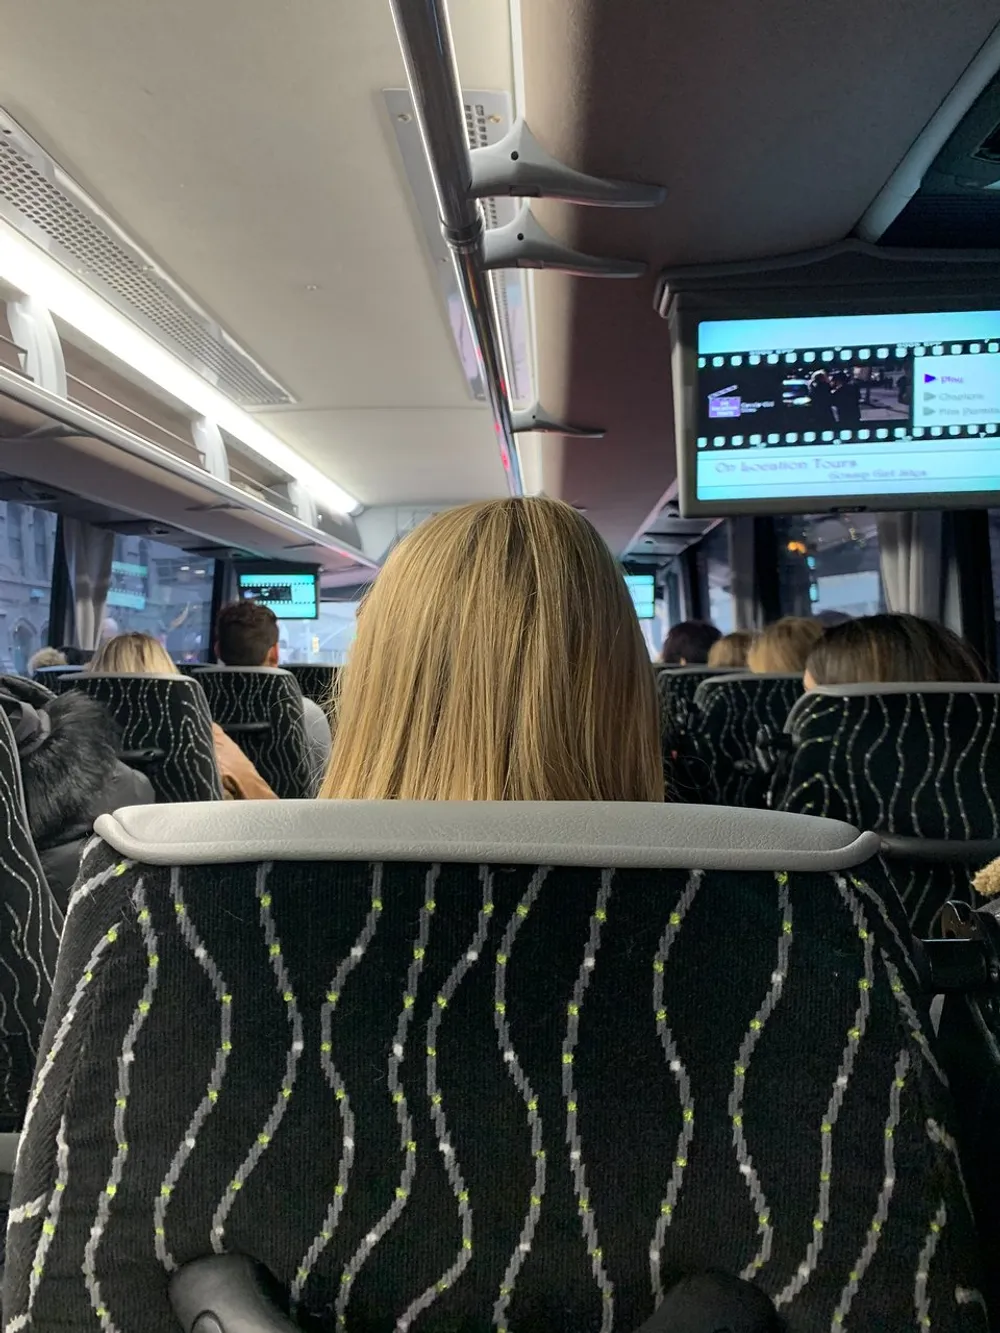 A person with blonde hair is seated in a bus facing forward with a screen displaying some information above them